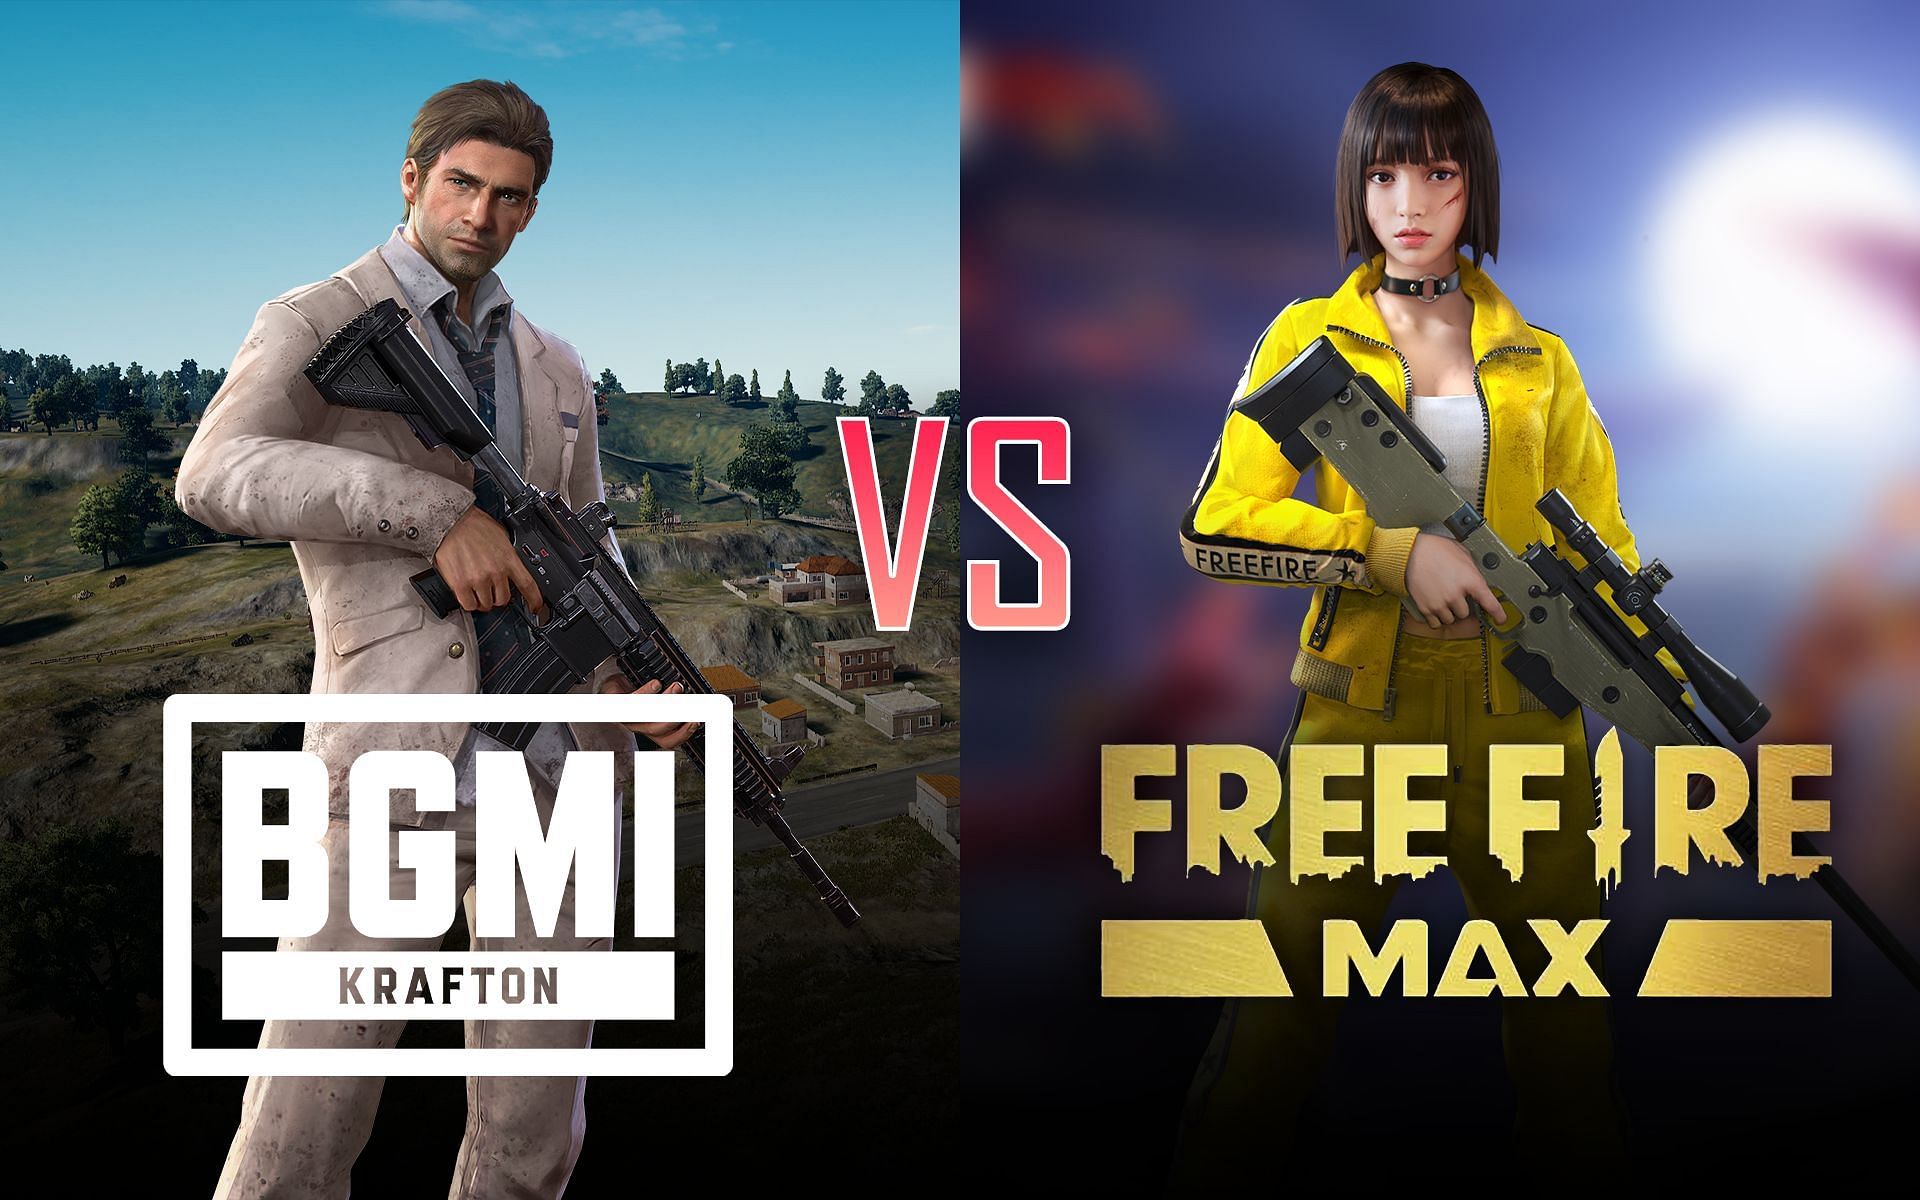 Comparing the in-game graphics of BGMI and Free Fire MAX (Image via Sportskeeda)